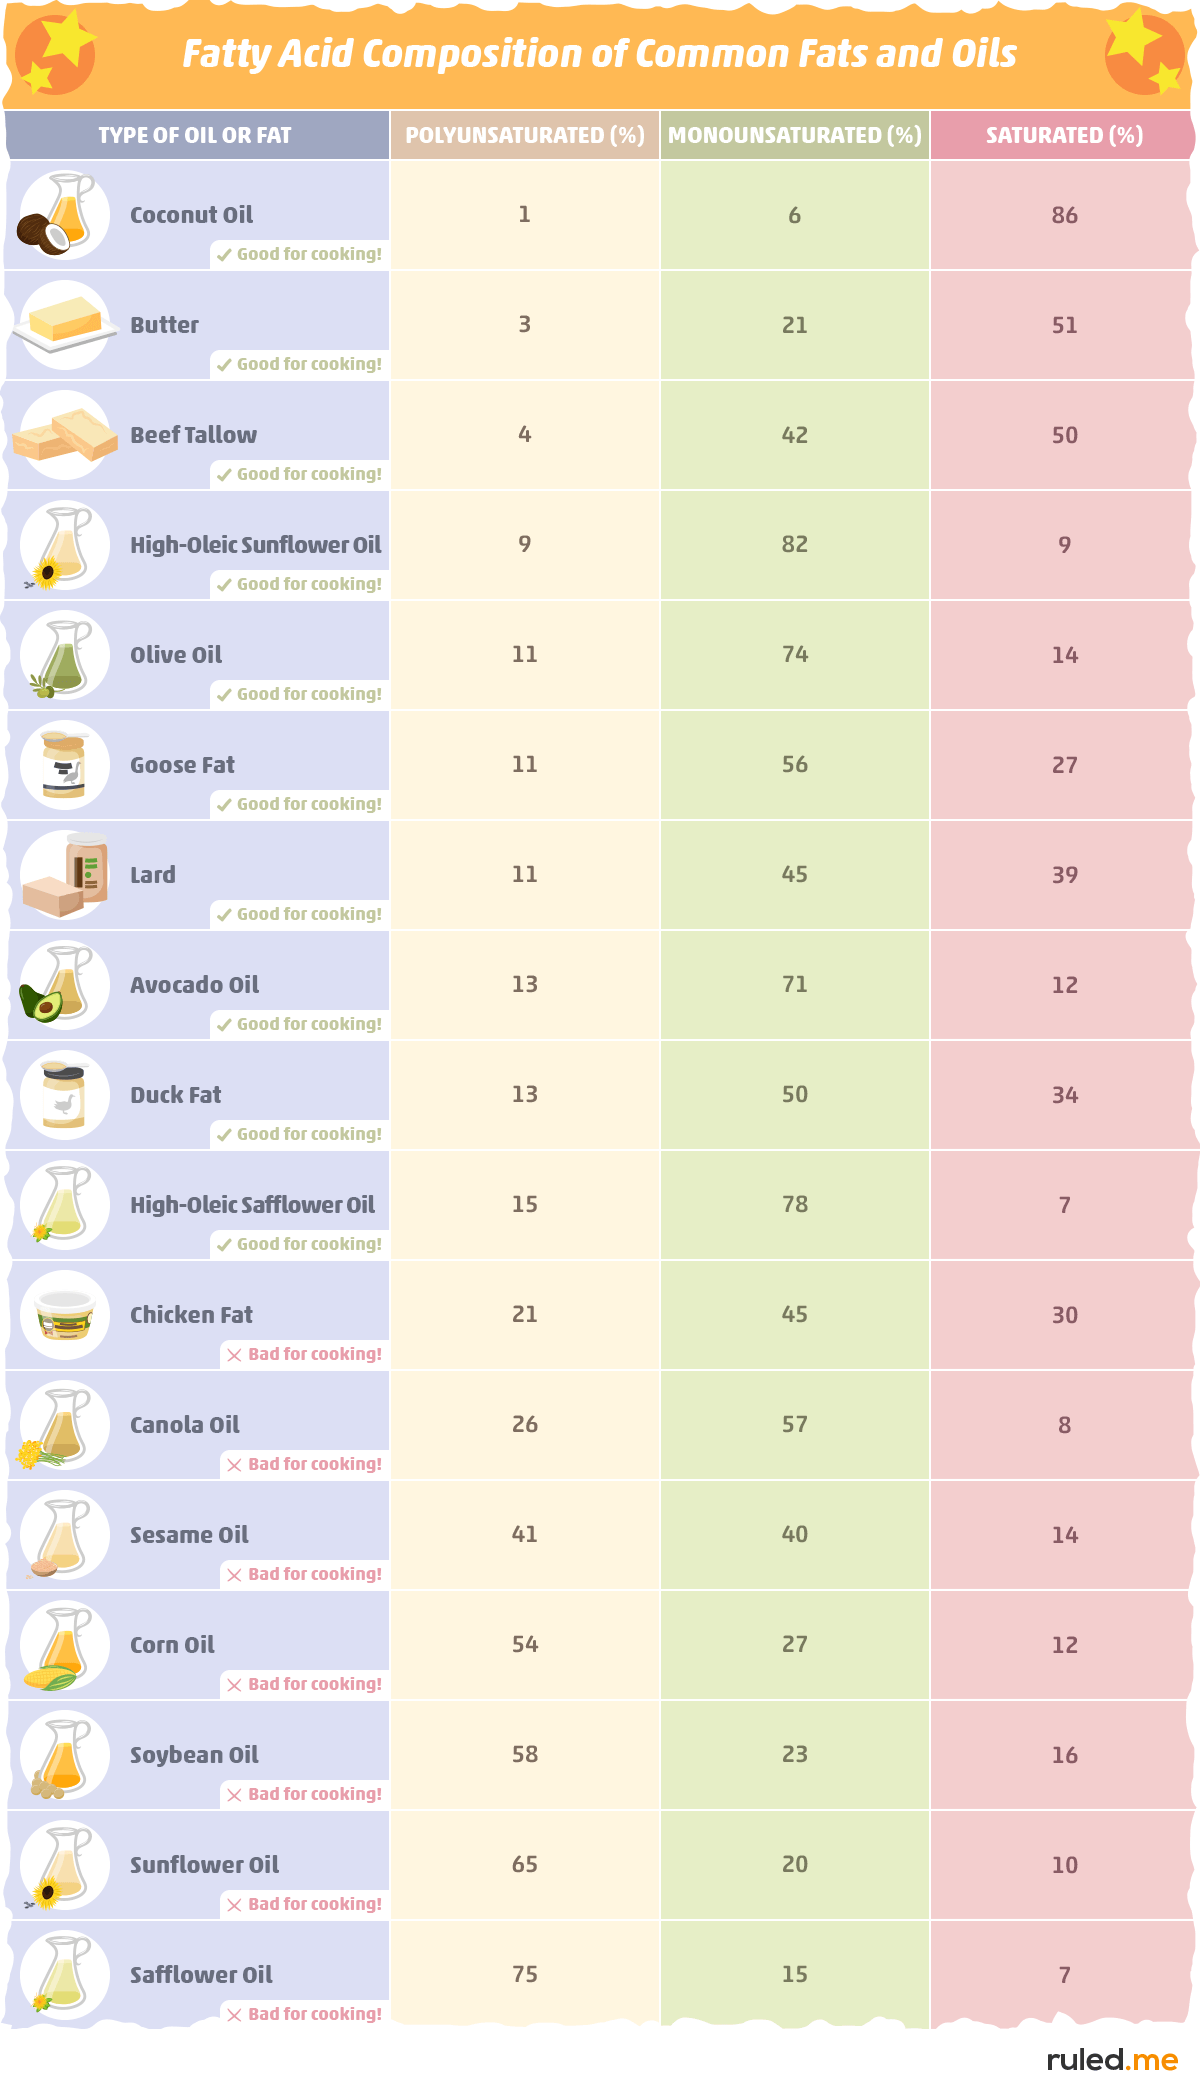 Good Fats and Oils for Low Carb Cooking and Baking